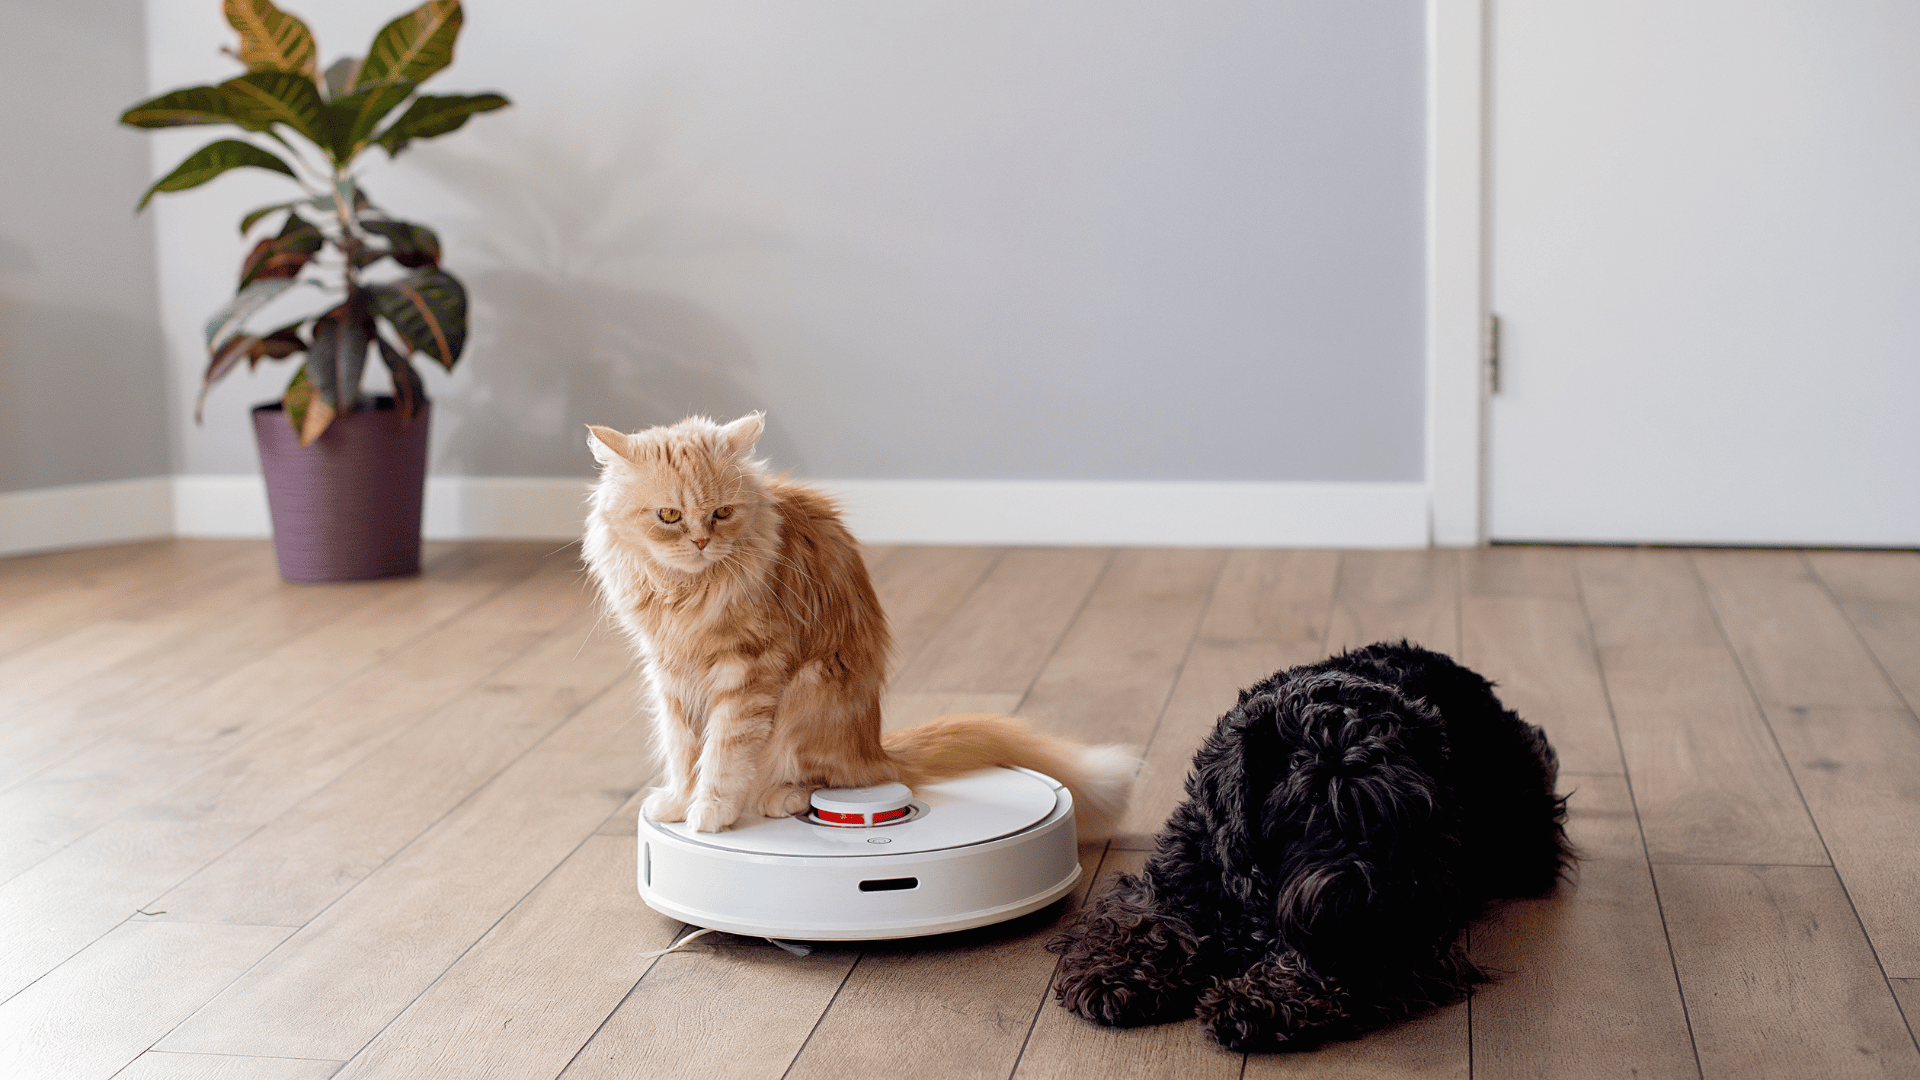 How to maintain a robotic vacuum for pet hair?